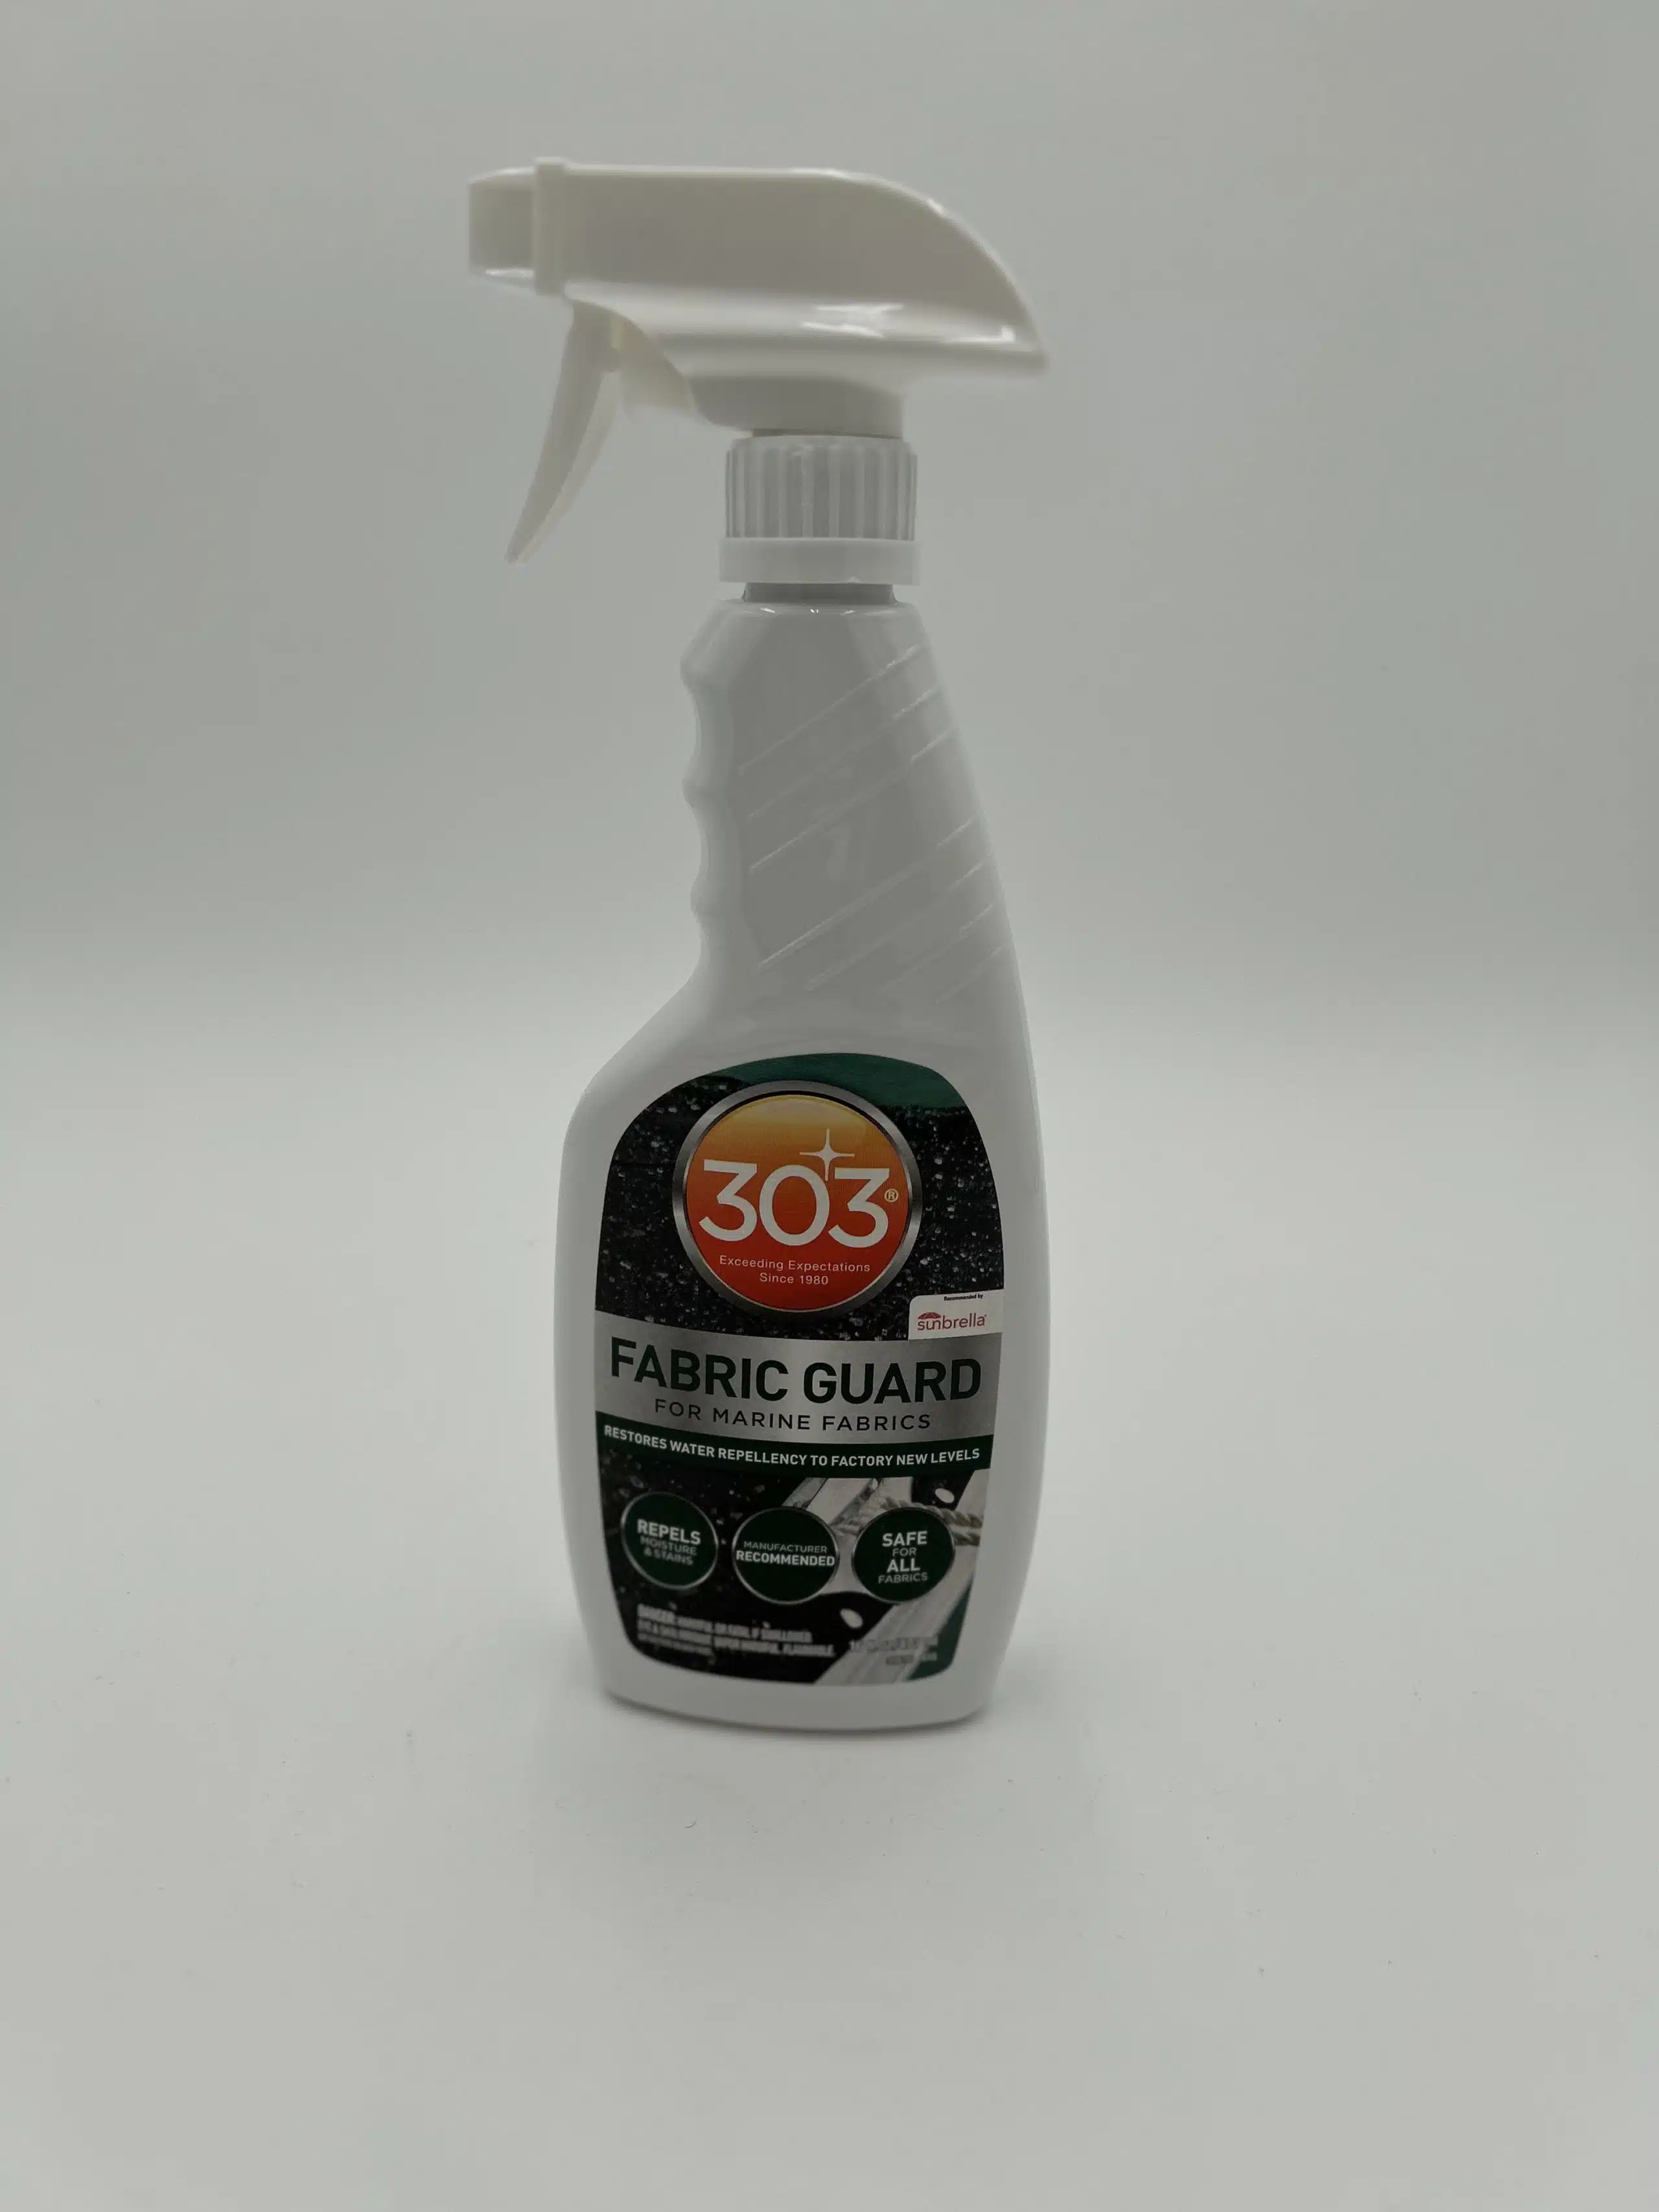 303 Fabric Guard Water Repellent